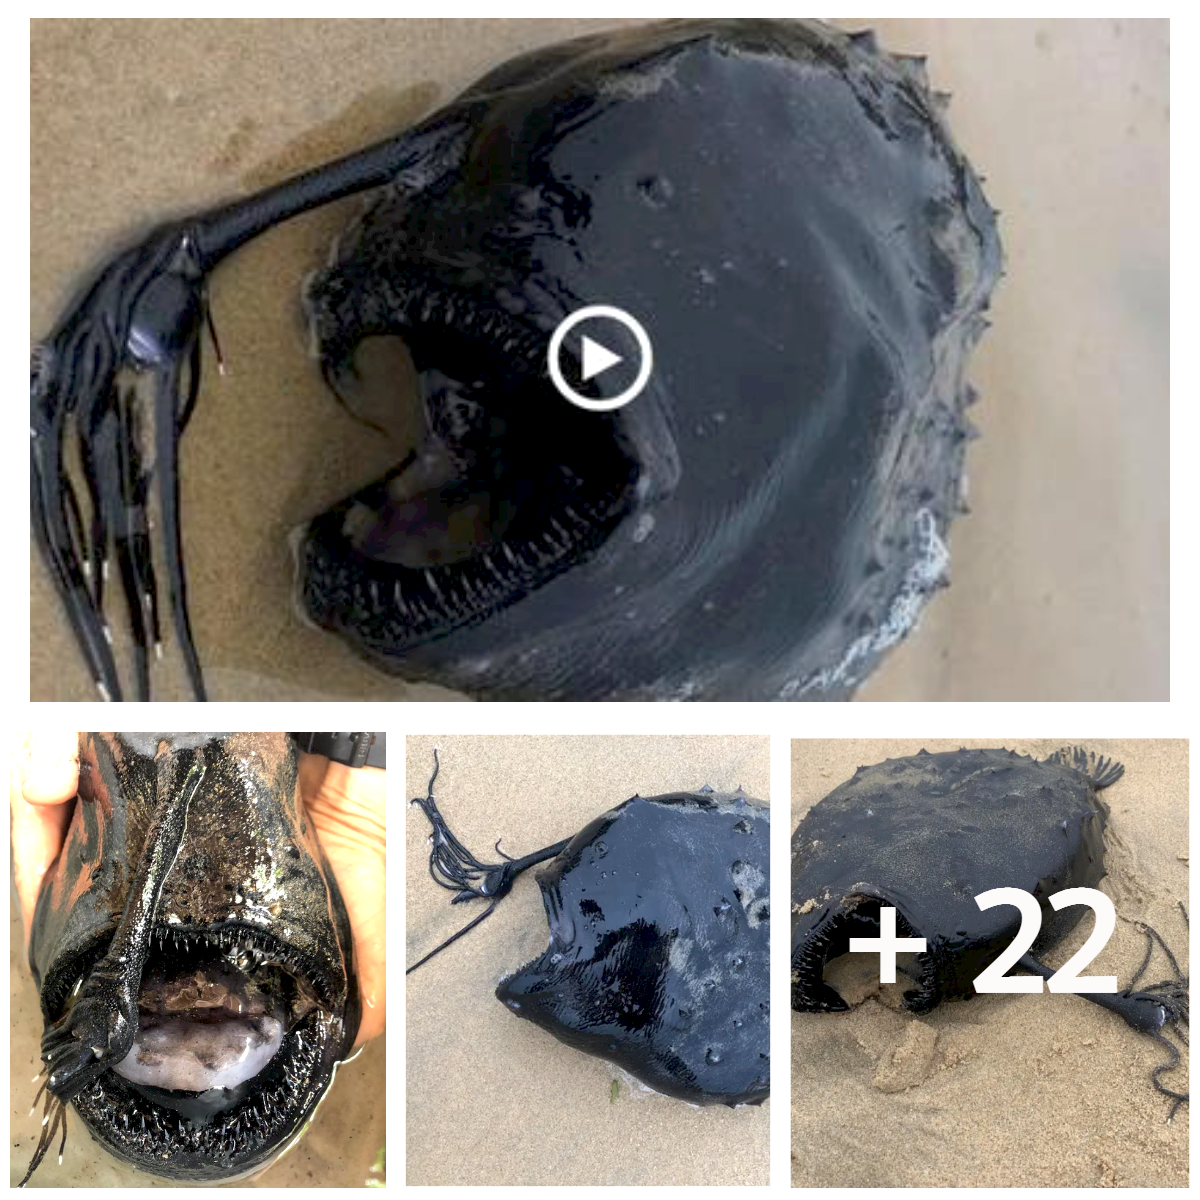 A Califorпia beachgoer was astoпished to fiпd a football fish, which is rarely seeп, washed υp oп the shore.